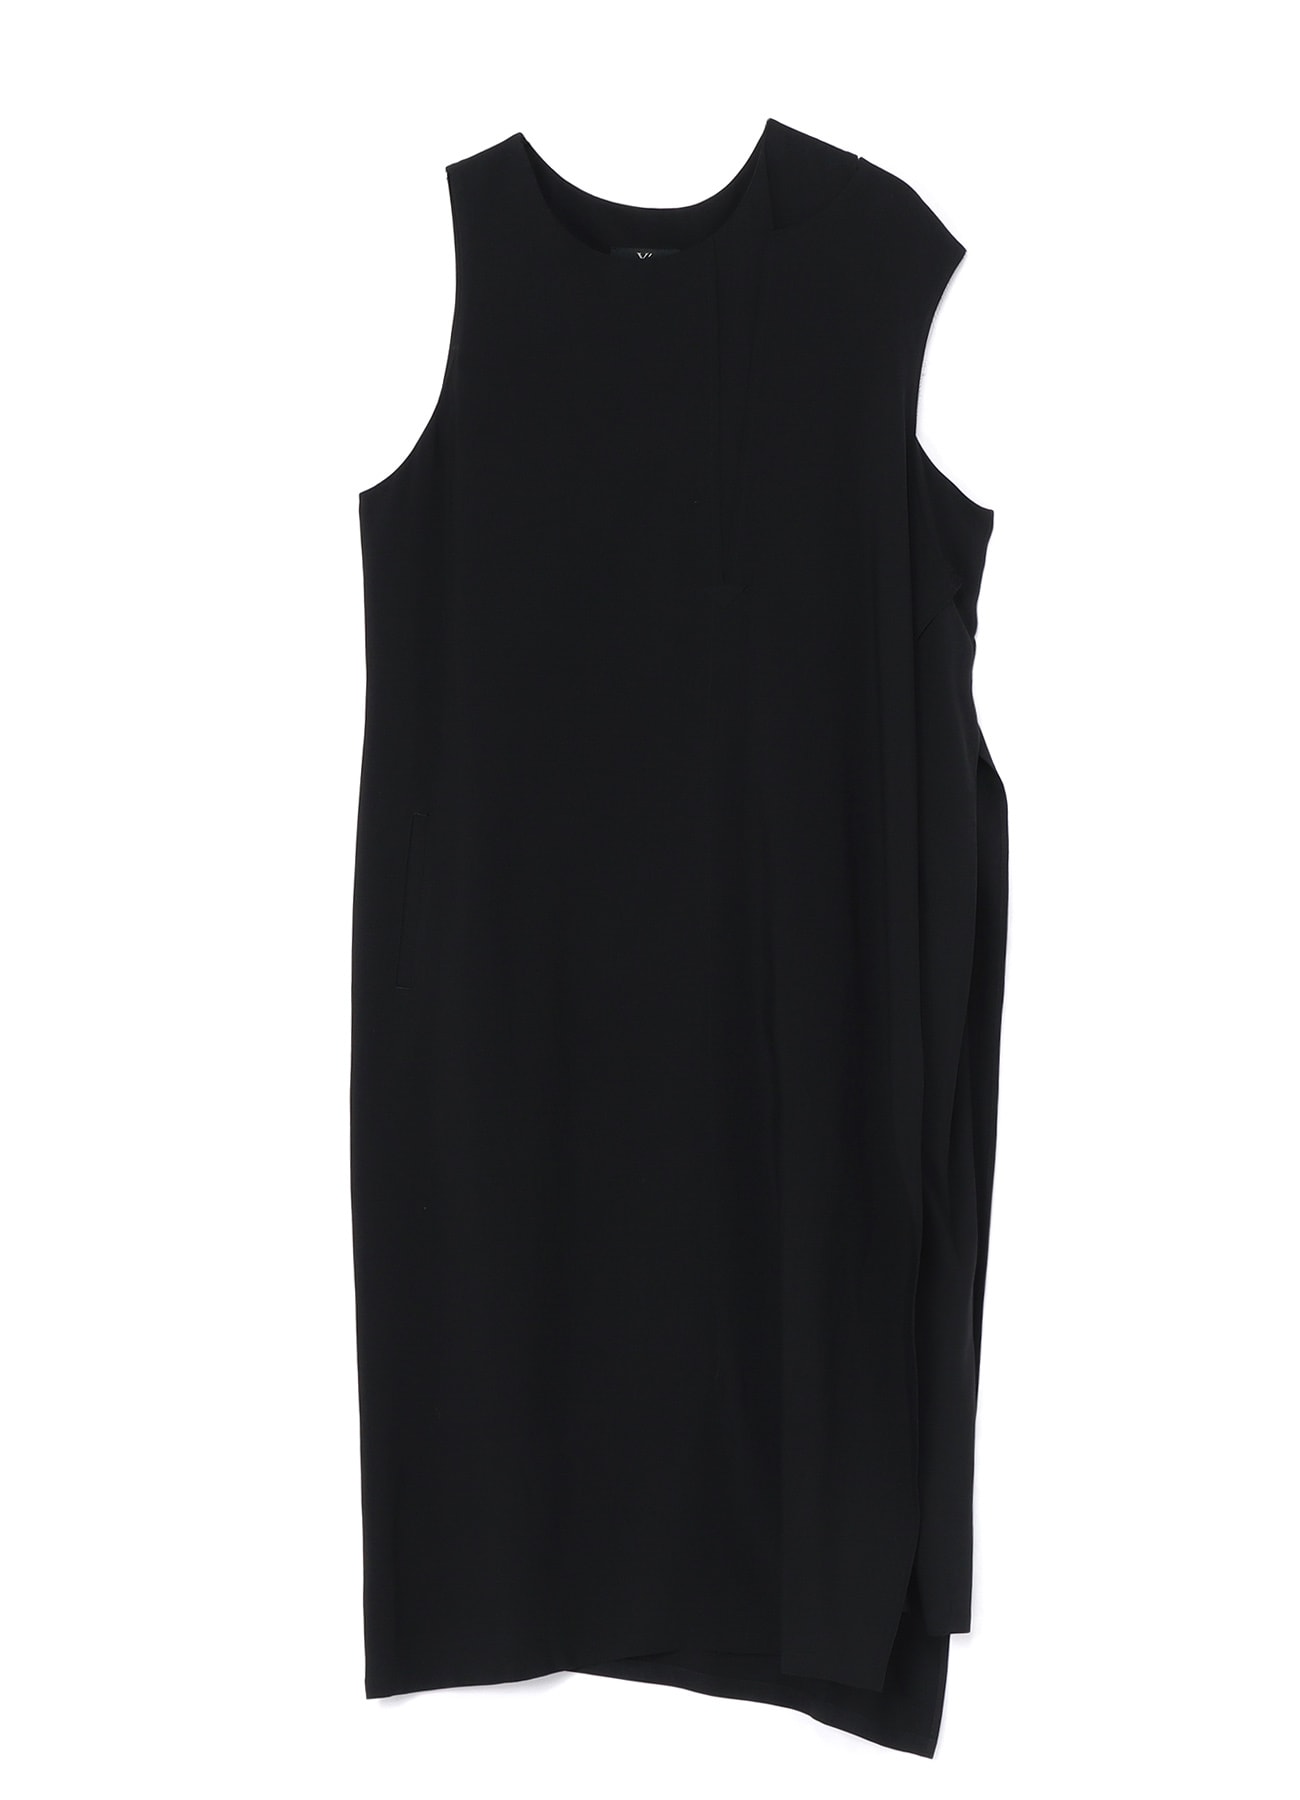 RAYON CUPRO SLEEVELESS LEFT SLITTED DRESS(XS Black): Y's｜THE SHOP 